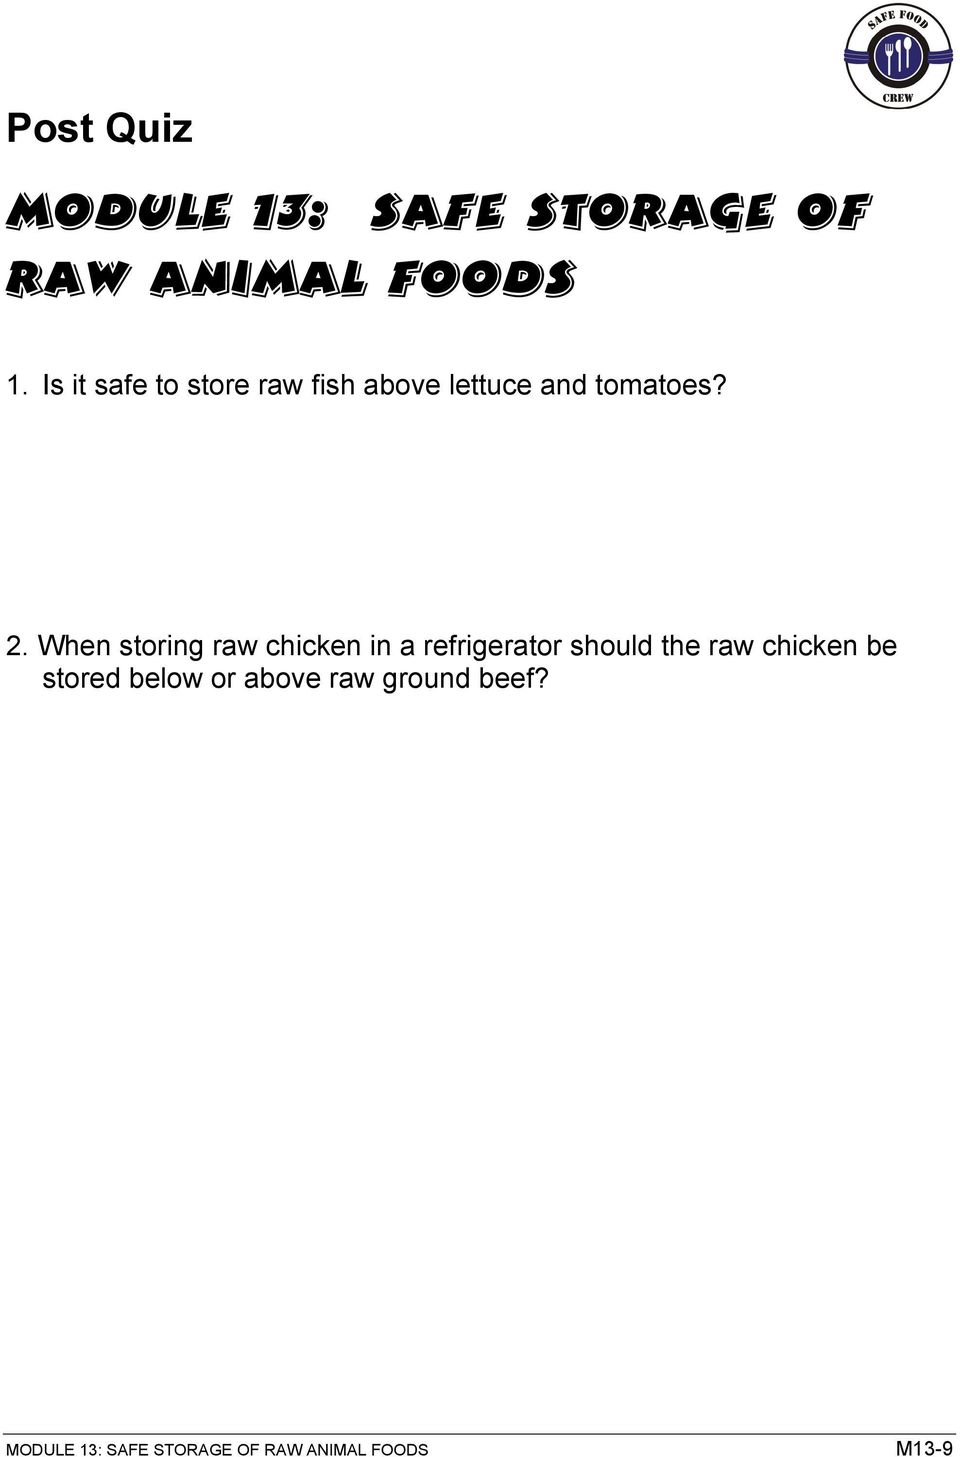 When storing raw chicken in a refrigerator should the raw chicken be